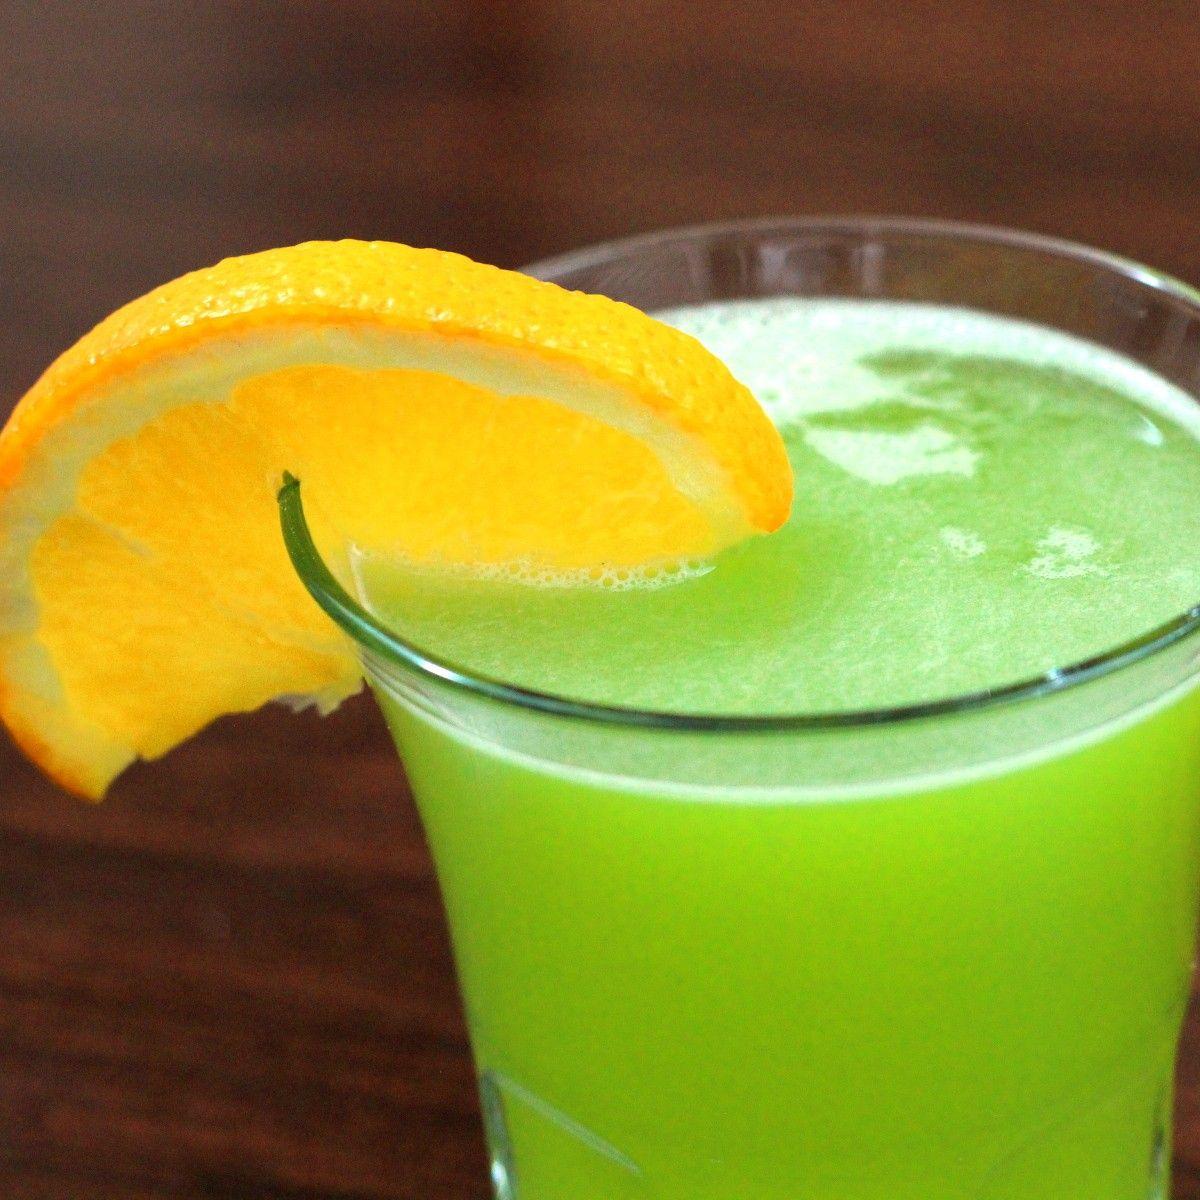 Green and Yellow Drink Logo - Gatorade Cocktail. Mix That Drink